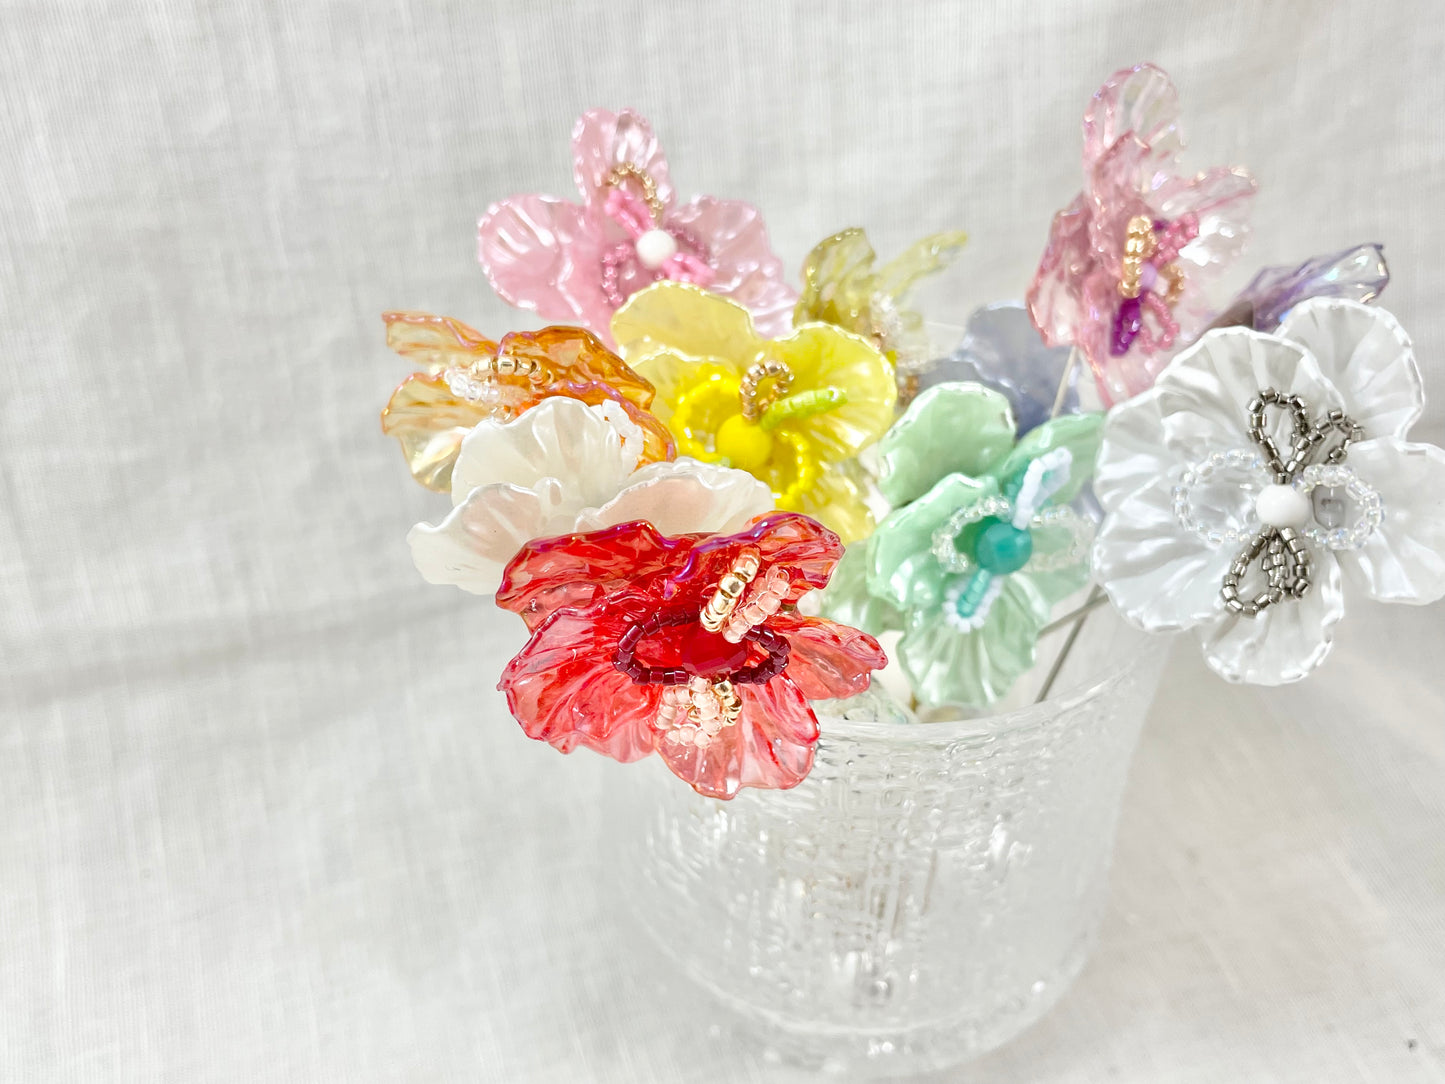 Pin brooch - flower - clear pink